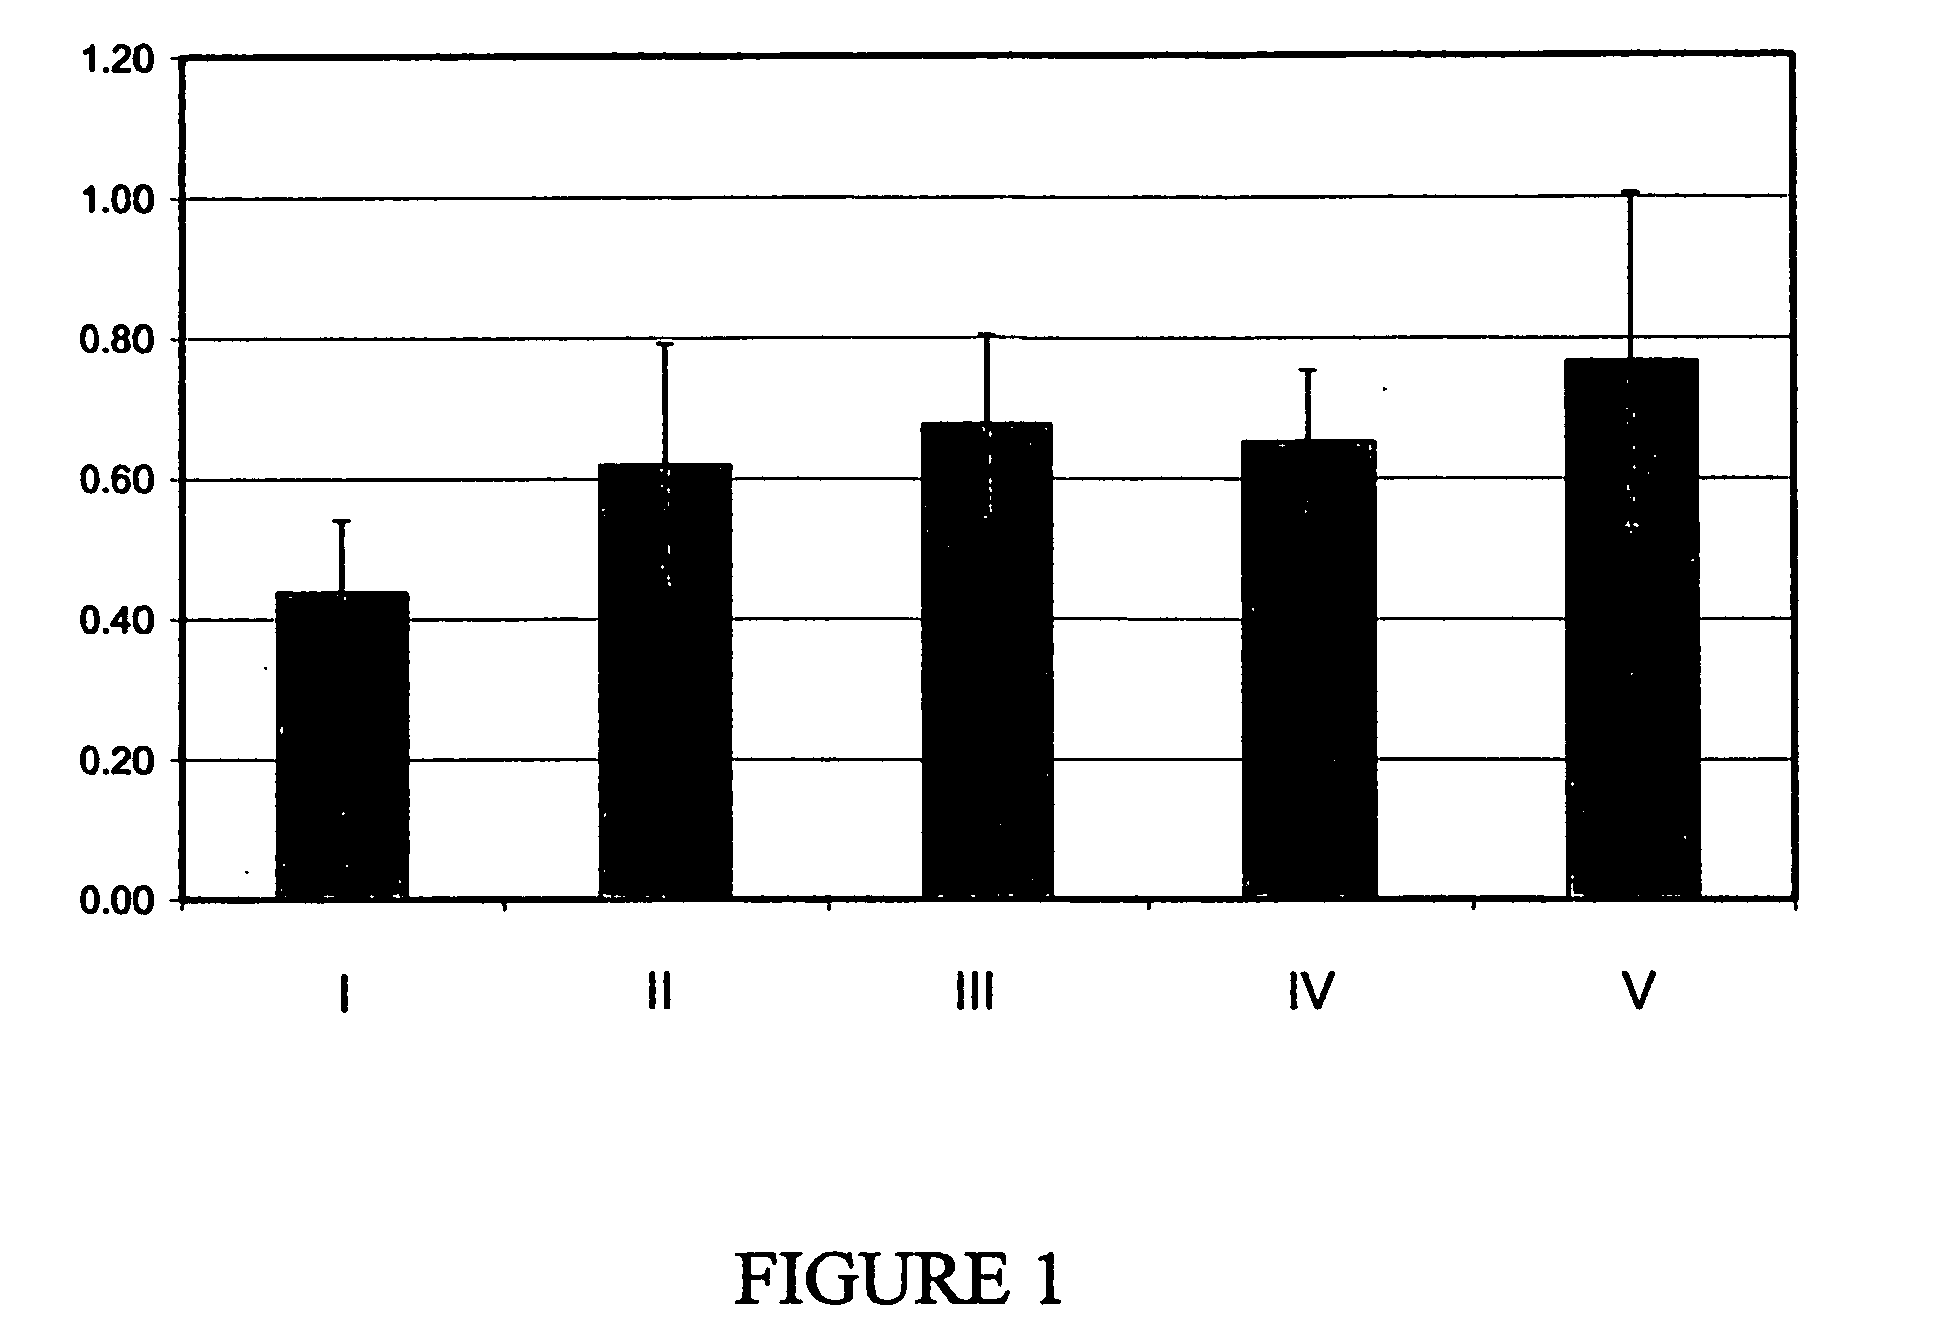 Tissue graft materials containing biocompatible agent and methods of making and using same